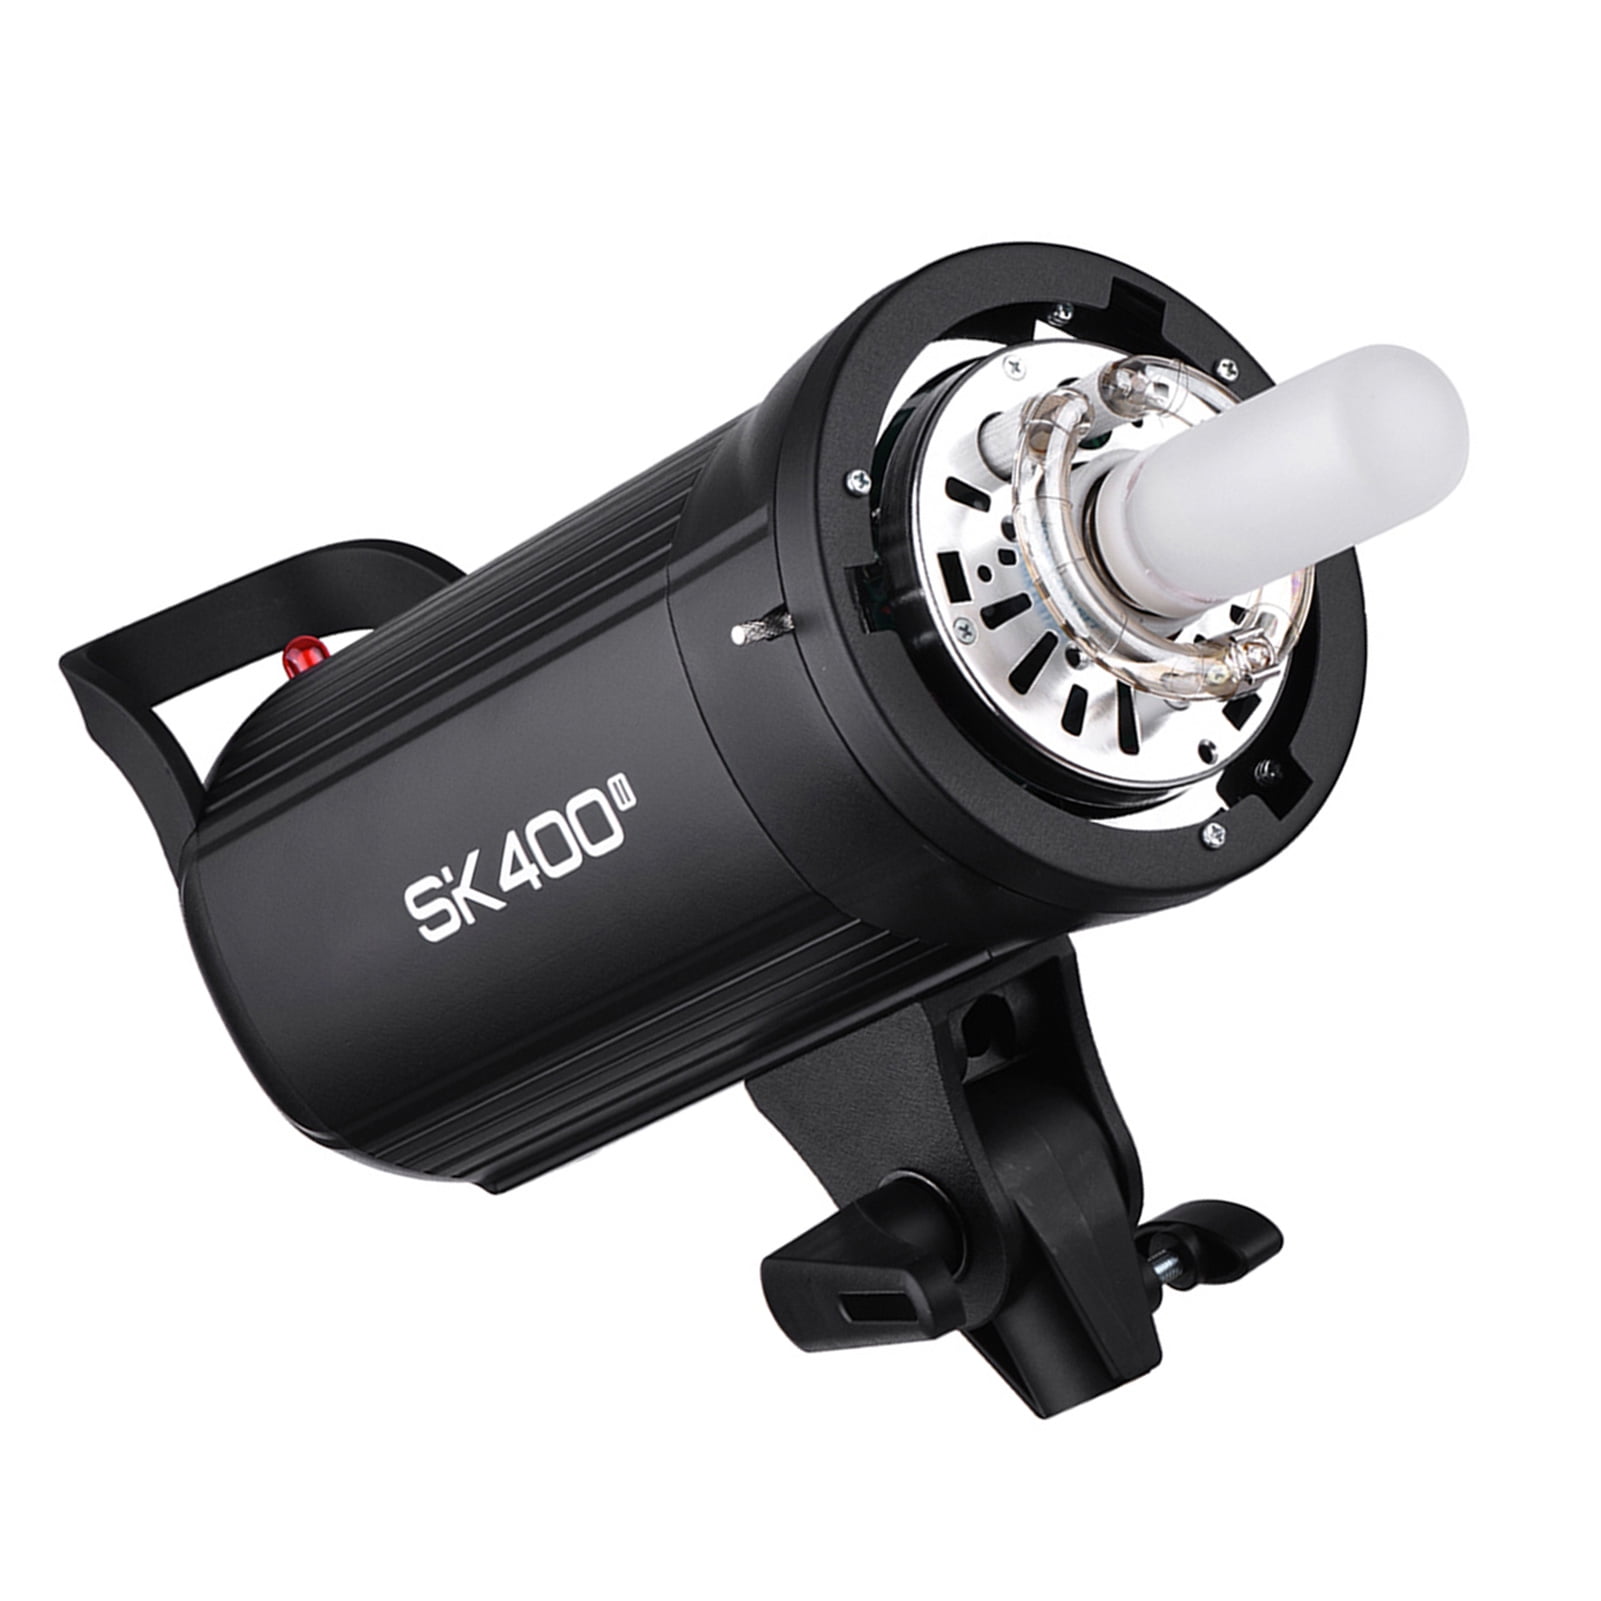 Godox SK400II 400Ws Studio Flash Strobe Light Built-in Godox 2.4G Wireless X System GN65 5600K with 150W Modeling Lamp for E-Commerce Product Portrait Lifestyle Photography 